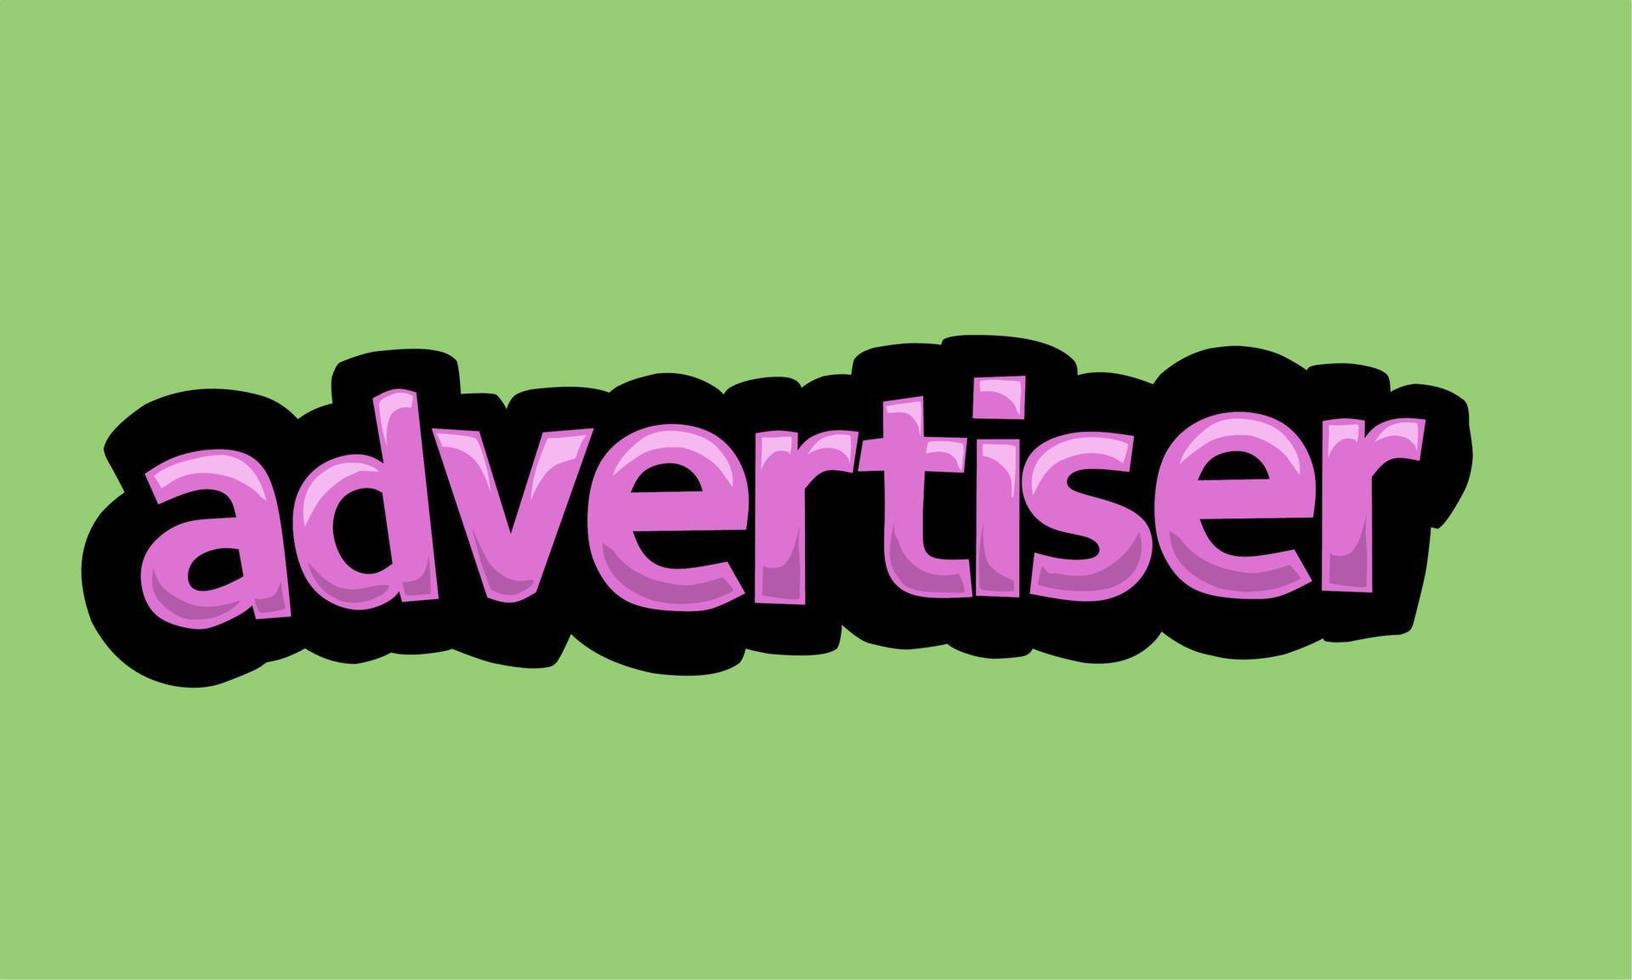 ADVERTISER writing vector design on a green background